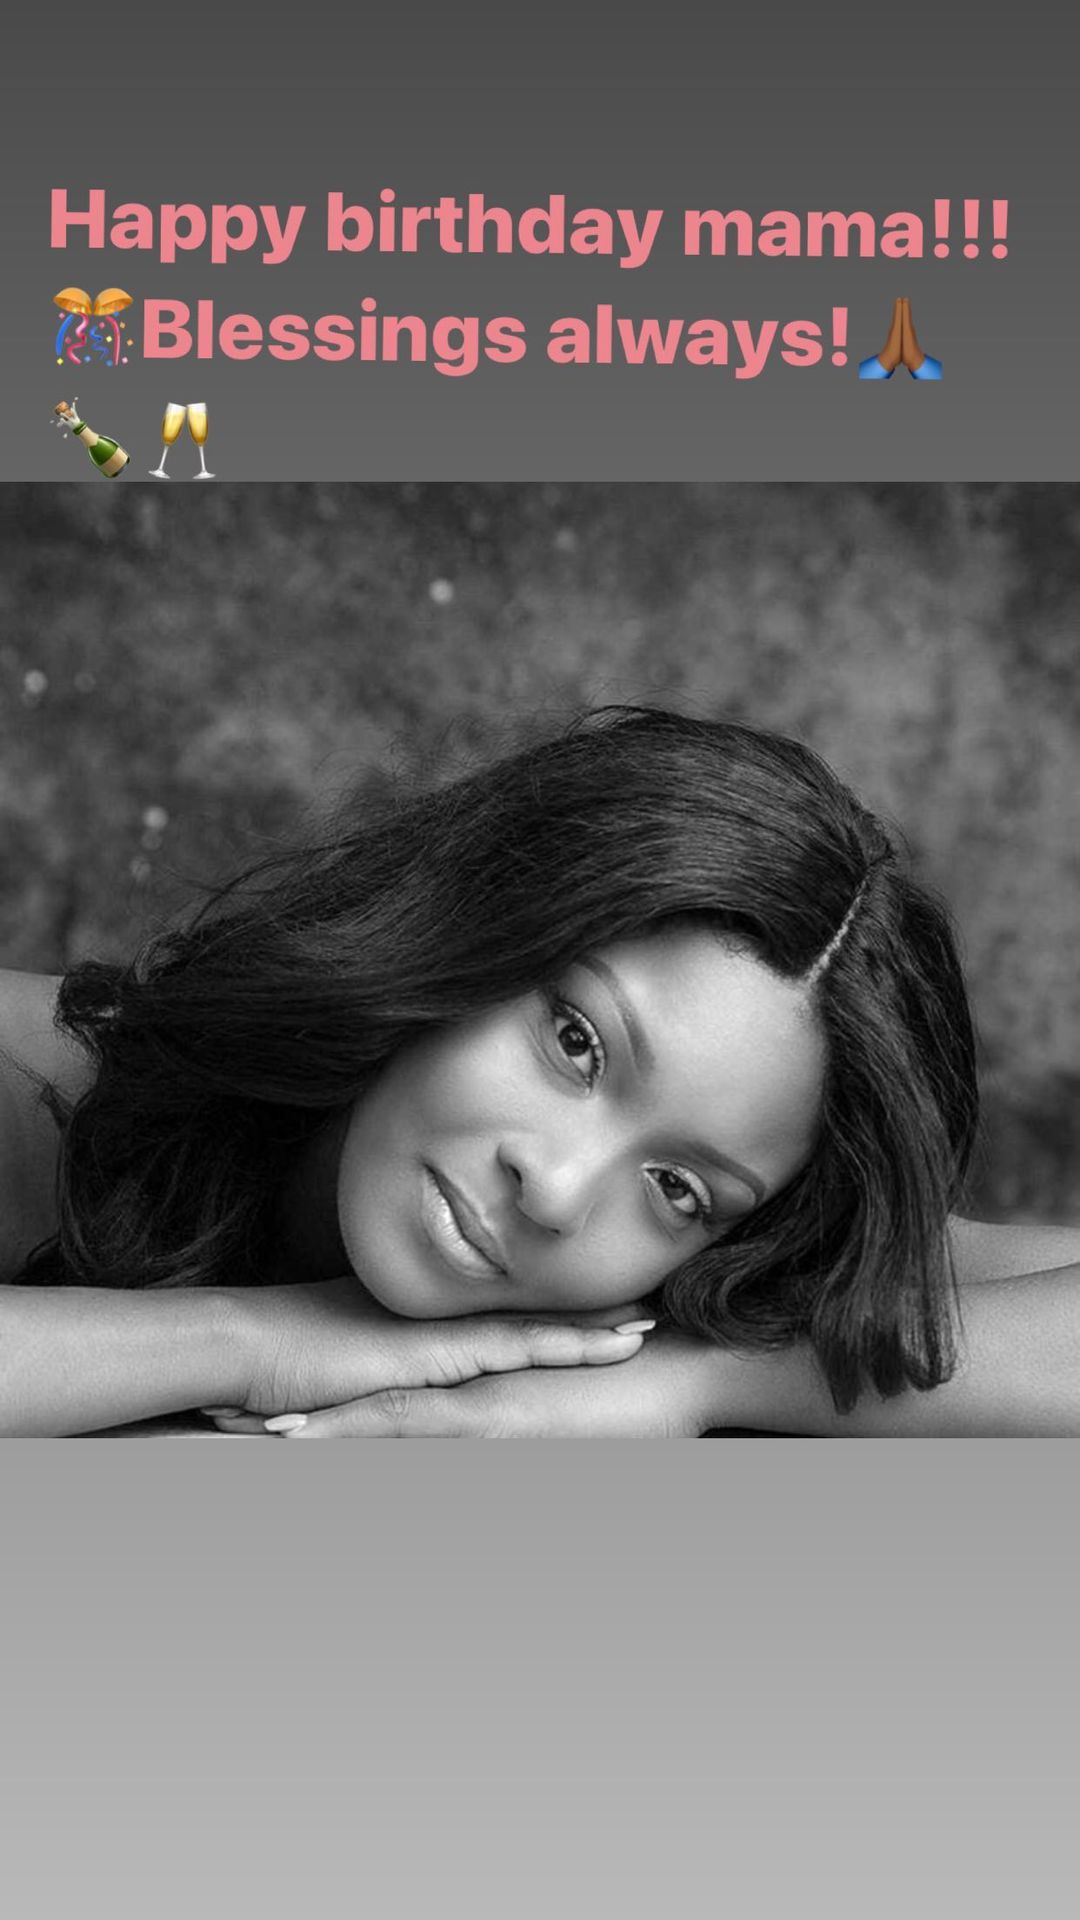 Gbenro's message to Osas on her birthday [Instagram/GbenroAjibade]